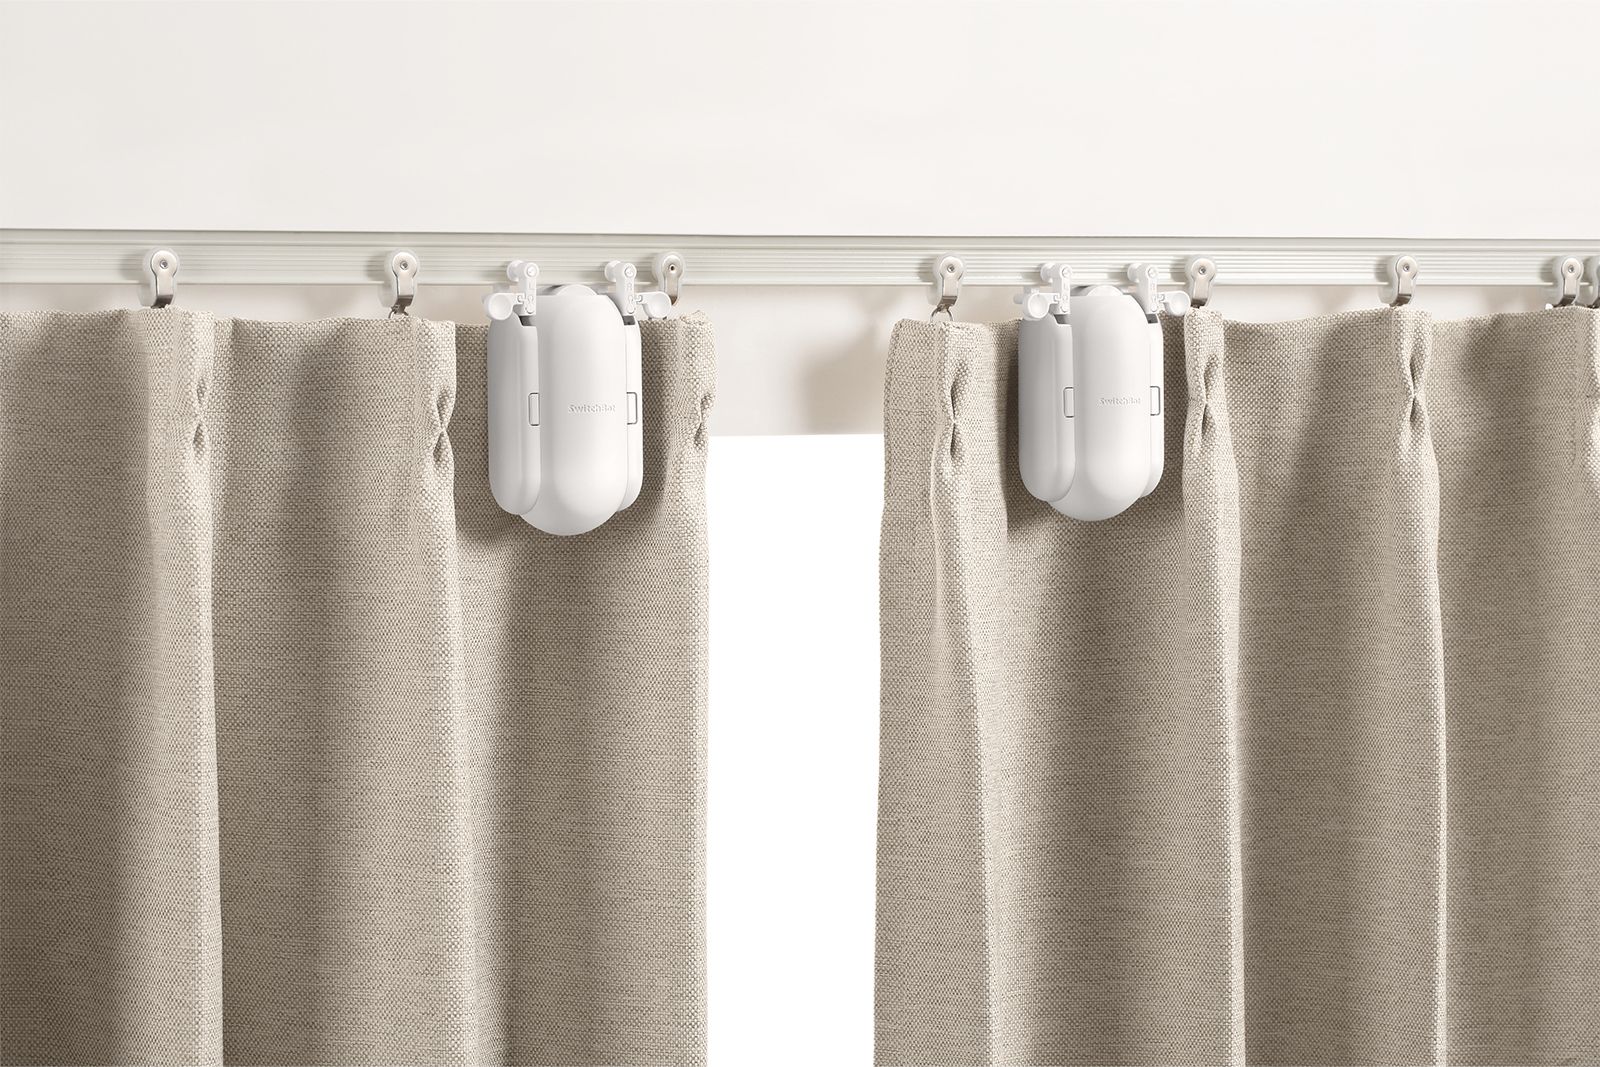 Make your curtains smart within 30 seconds using these SwitchBot curtains and accessories today photo 9